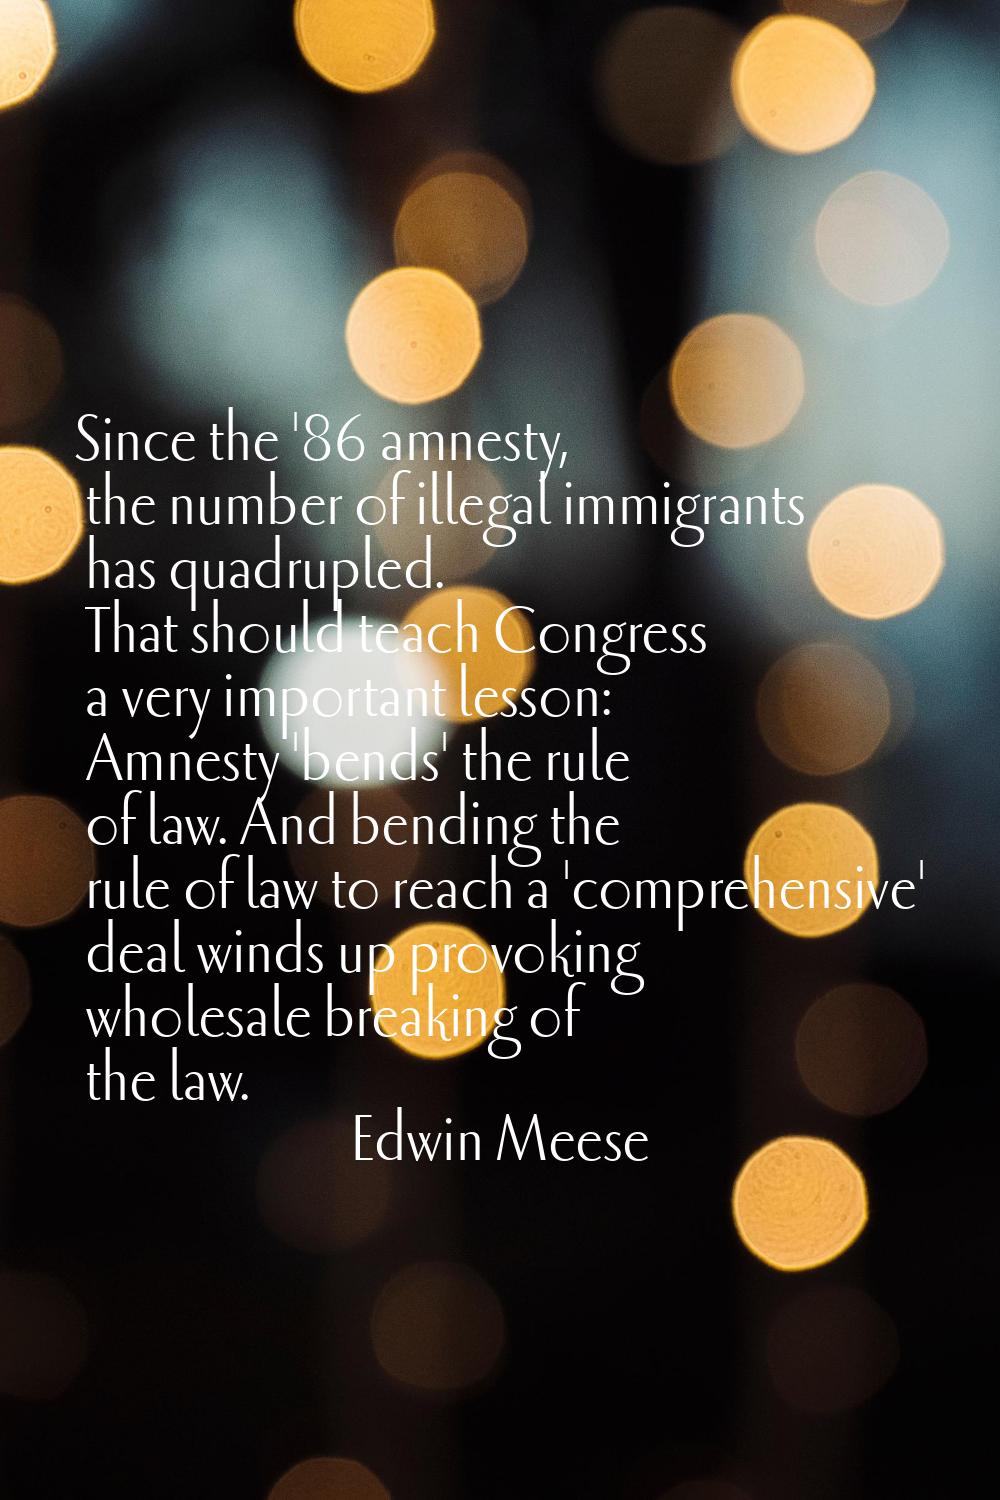 Since the '86 amnesty, the number of illegal immigrants has quadrupled. That should teach Congress 